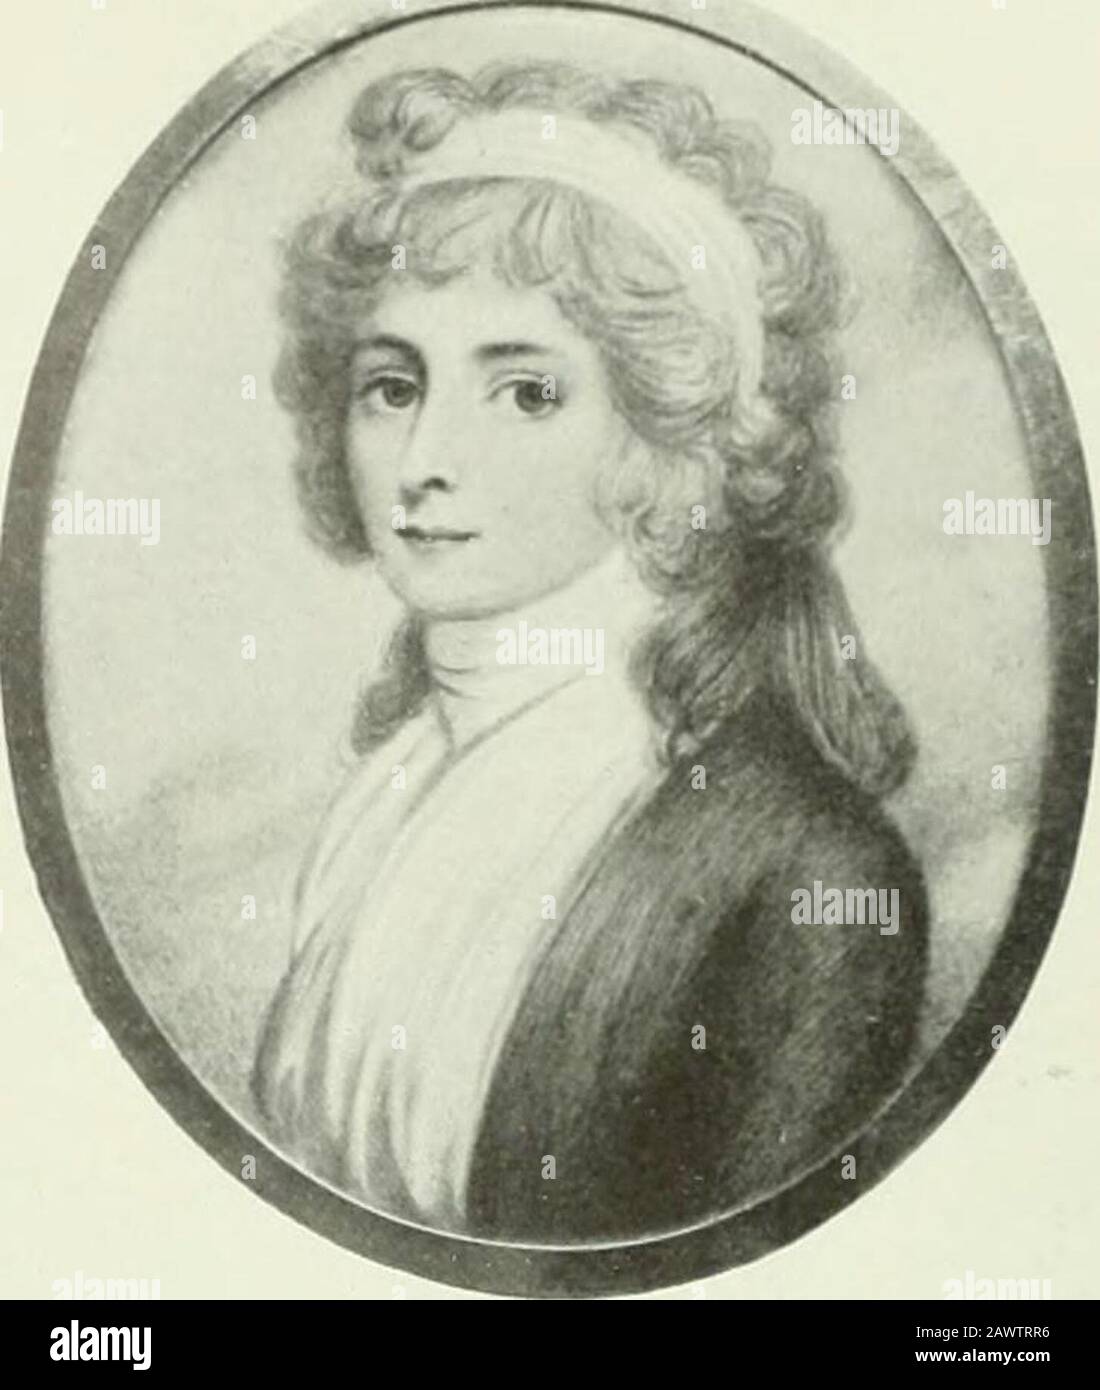 International studio . JAMES ANTHONY, JUNIOR BY GILBERT STUART (Collection of Miss Maty B. Smilli) Miss Mary B. Smith, Colonel Tobias Lear, byCottoni, lent by Mrs. Wilson Eyre, Lady Northwick,by Andrew Plimer, lent by Mrs. Joseph Drexel,H. C. R., by Jean Baptiste Isabey, lent byMiss Cushman, a portrait of Patrick Henry, byLawrence Sully, lent by Gilbert S. Parker, Esq.,another of his wife by Thomas Sully, the painter ofthe portrait of Queen Victoria in the Wallace Collec-tion, lent by Gilbert L. Parker, M.D., and a portraitof Lady Erskine, by an unknown artist, should be LADY NORTHWICK BY ANDR Stock Photo